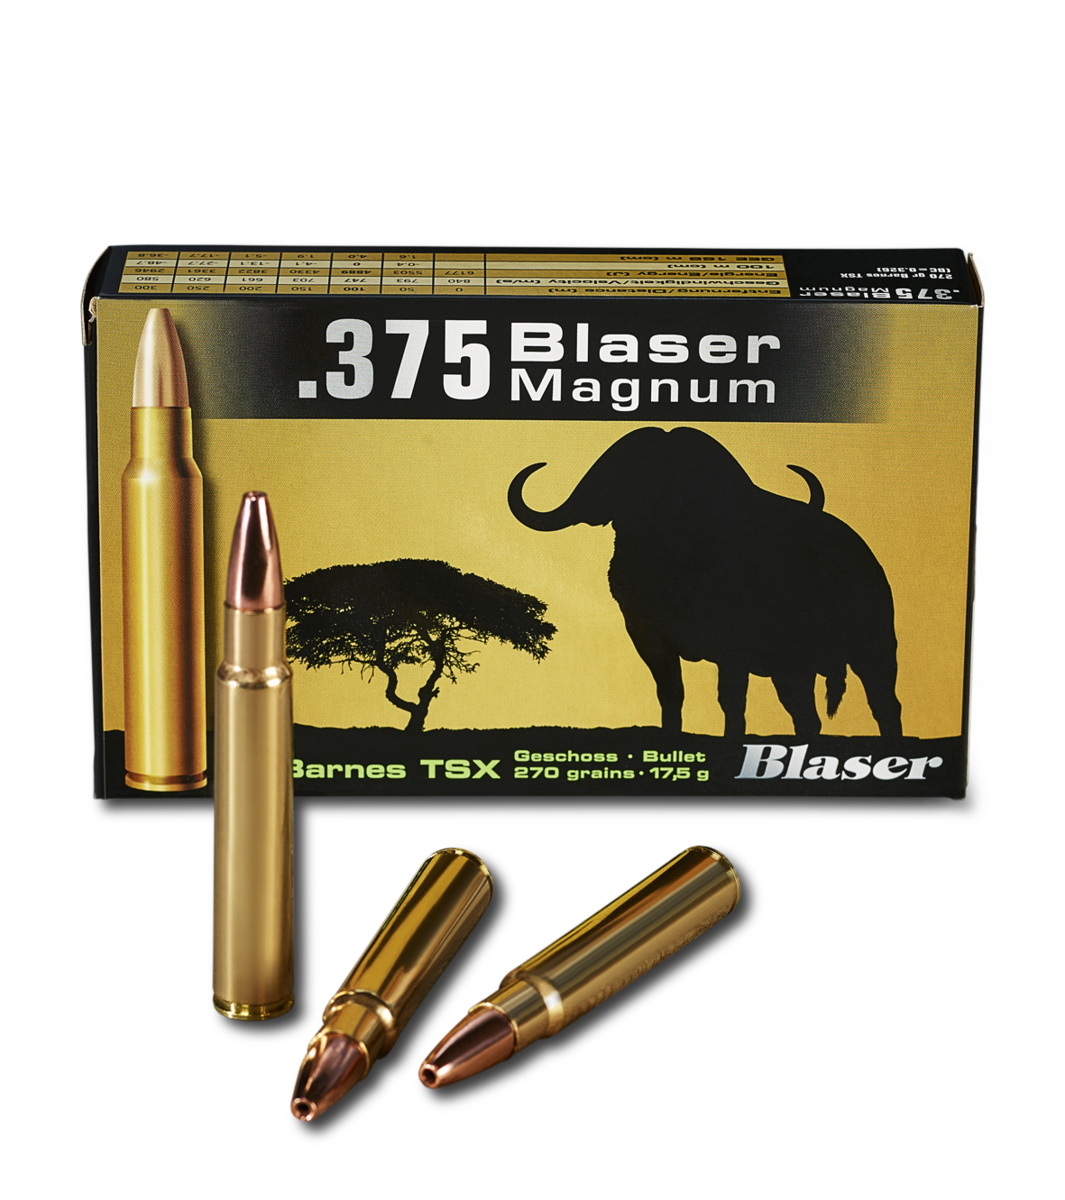  .375 Blaser Mag Review: Pros and cons of the .375 Blaser Mag